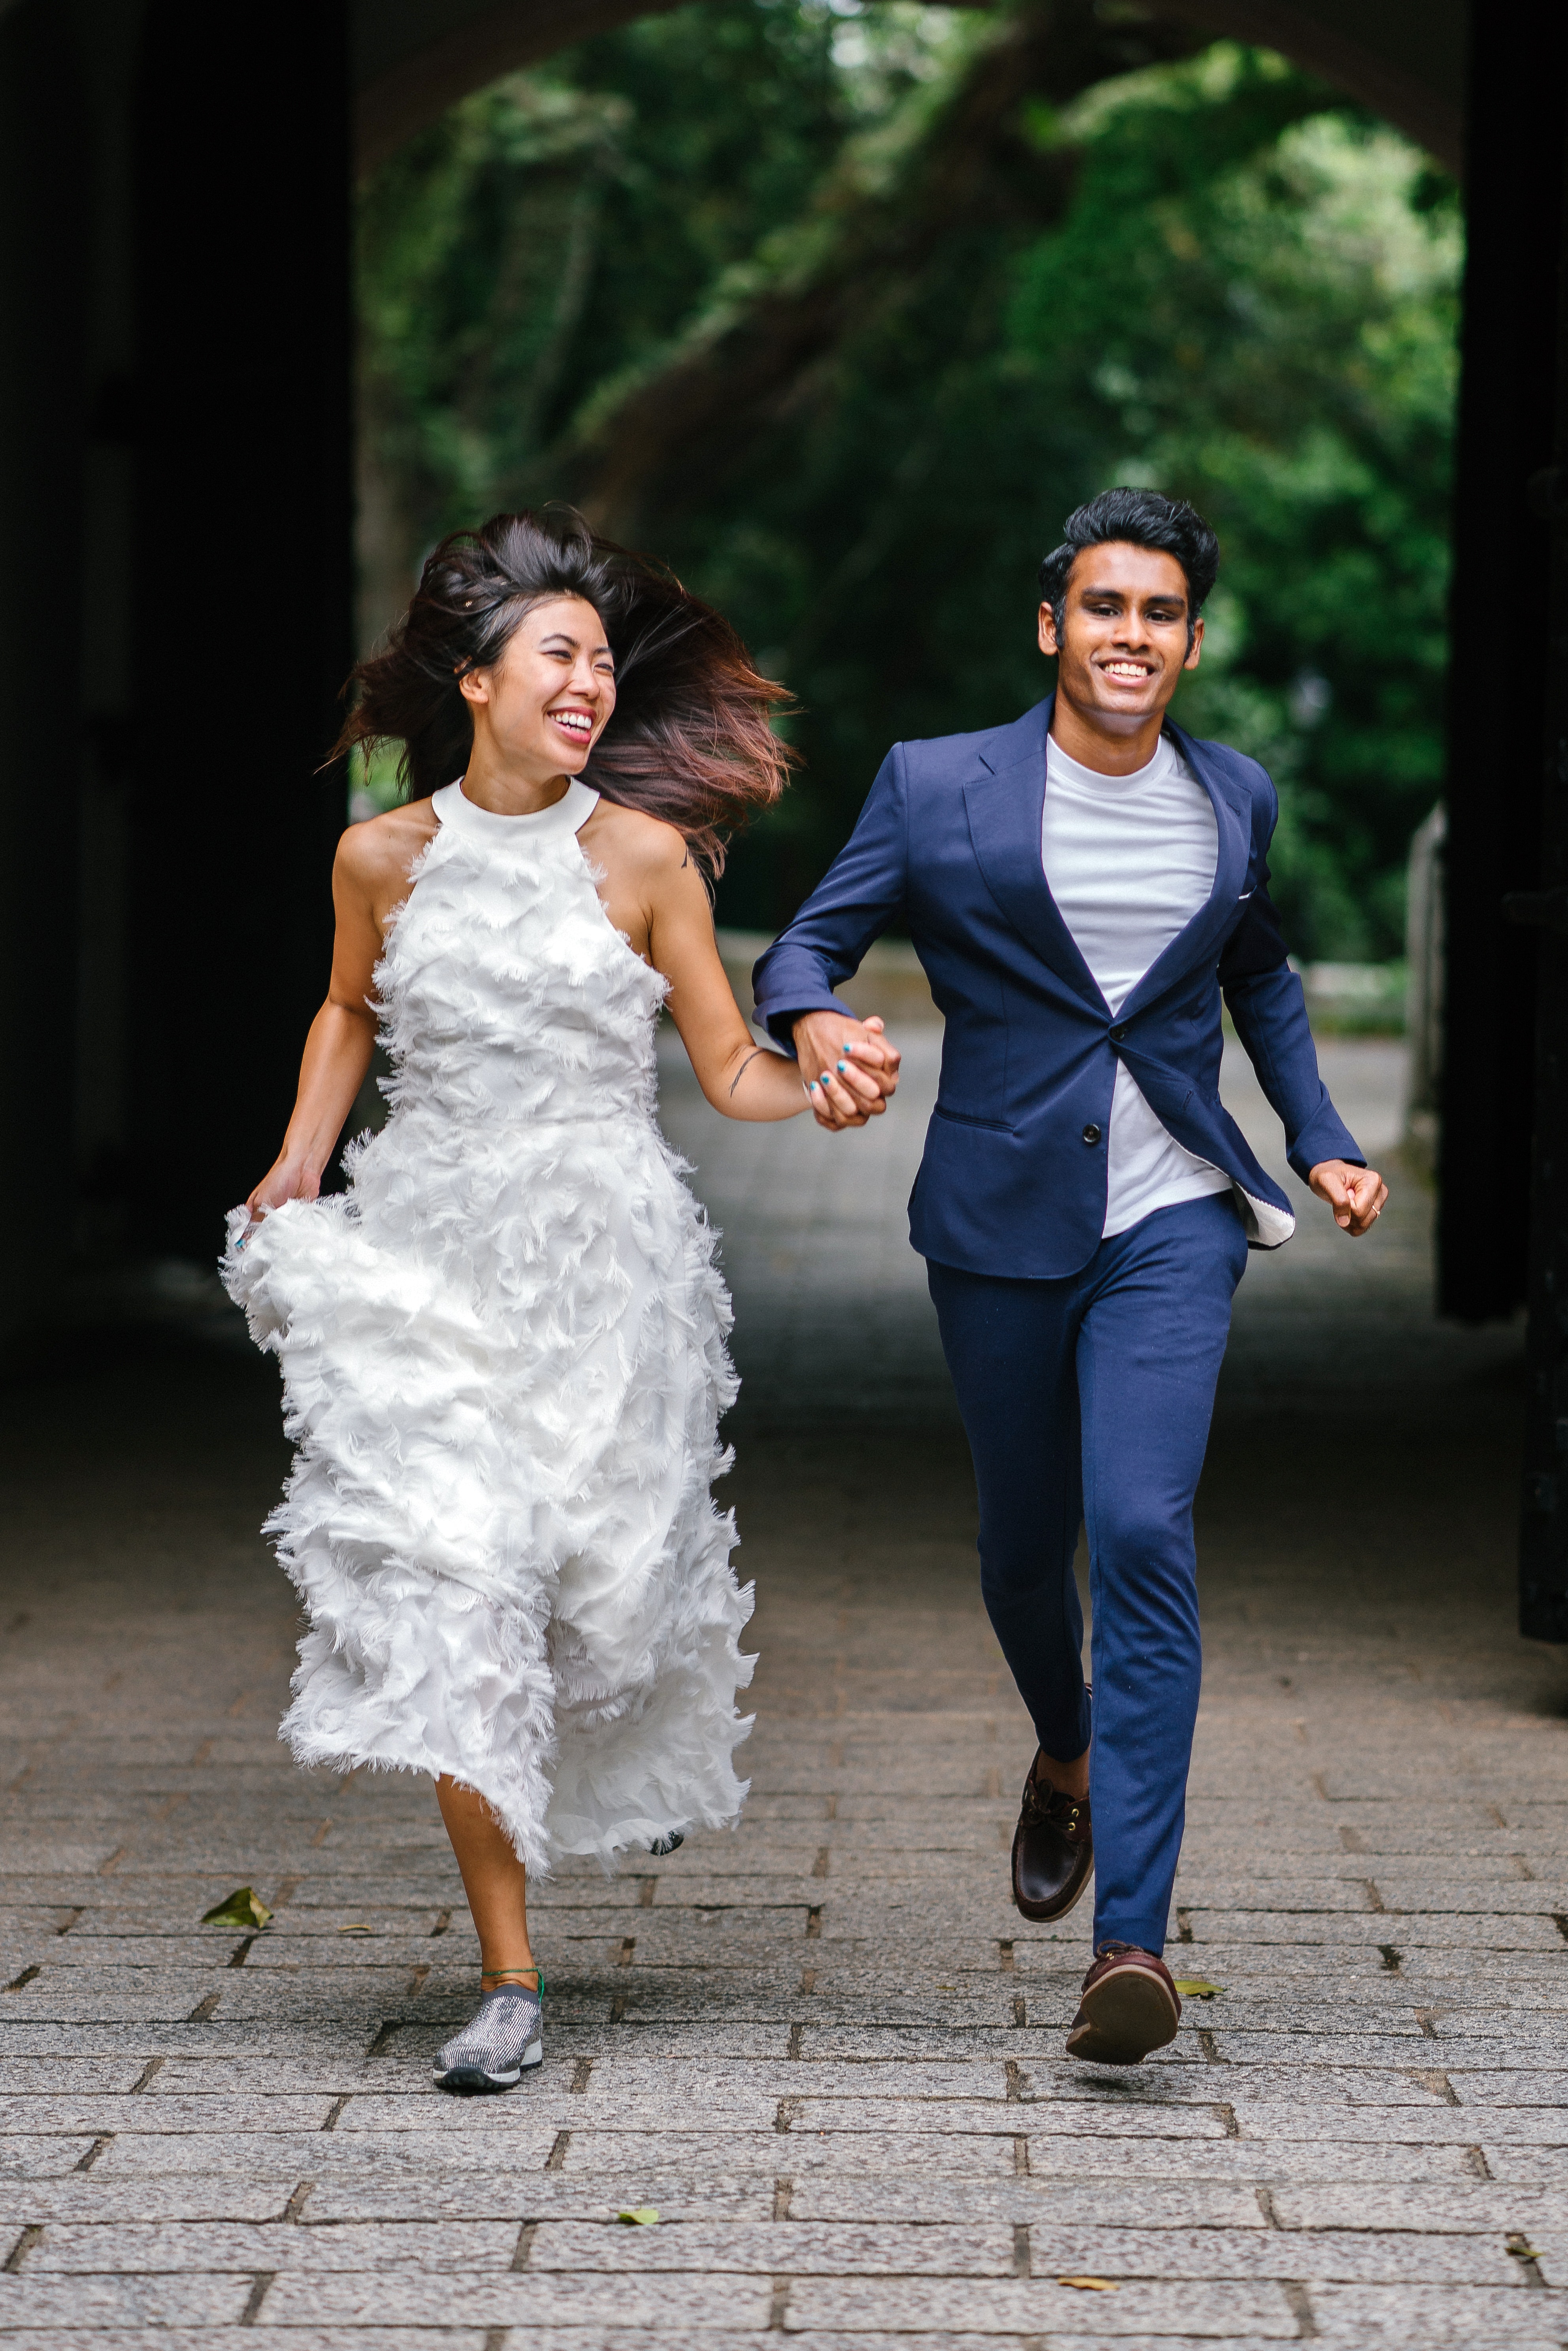 Bride and Groom Running on Concrete Pathway, Asian, Park, People, Photo shoot, HQ Photo